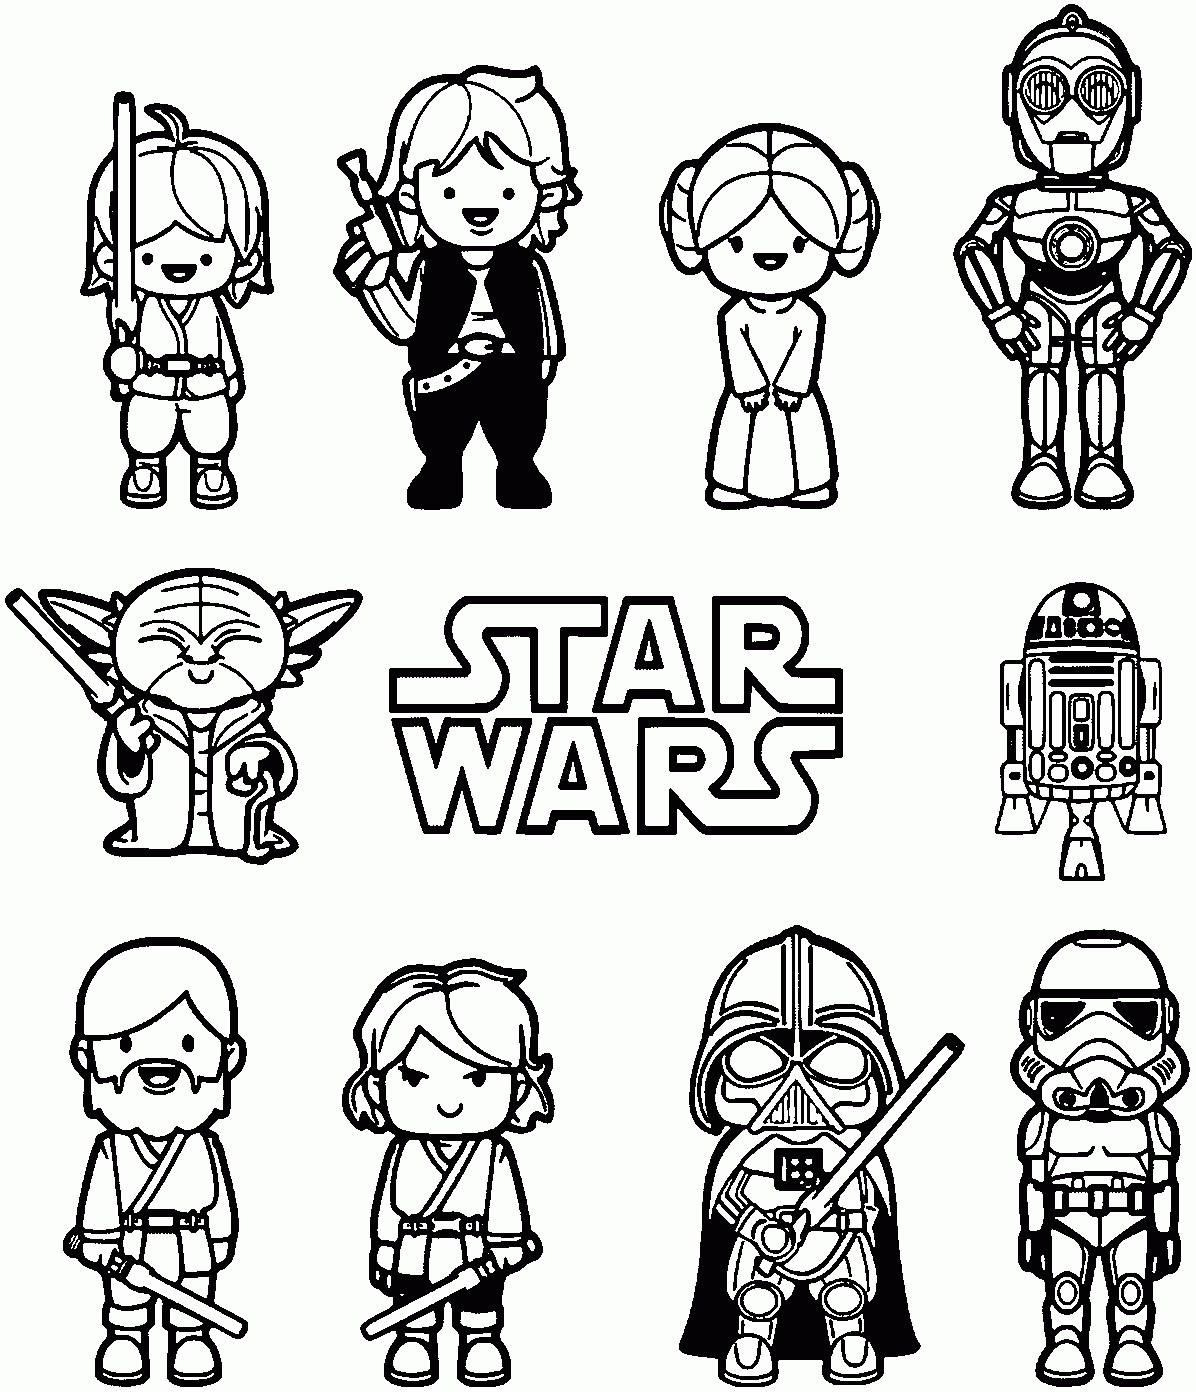 Coloring Pages : Star Wars Coloring Pages Free Printable Staggering - Free Printable Star Wars Coloring Pages